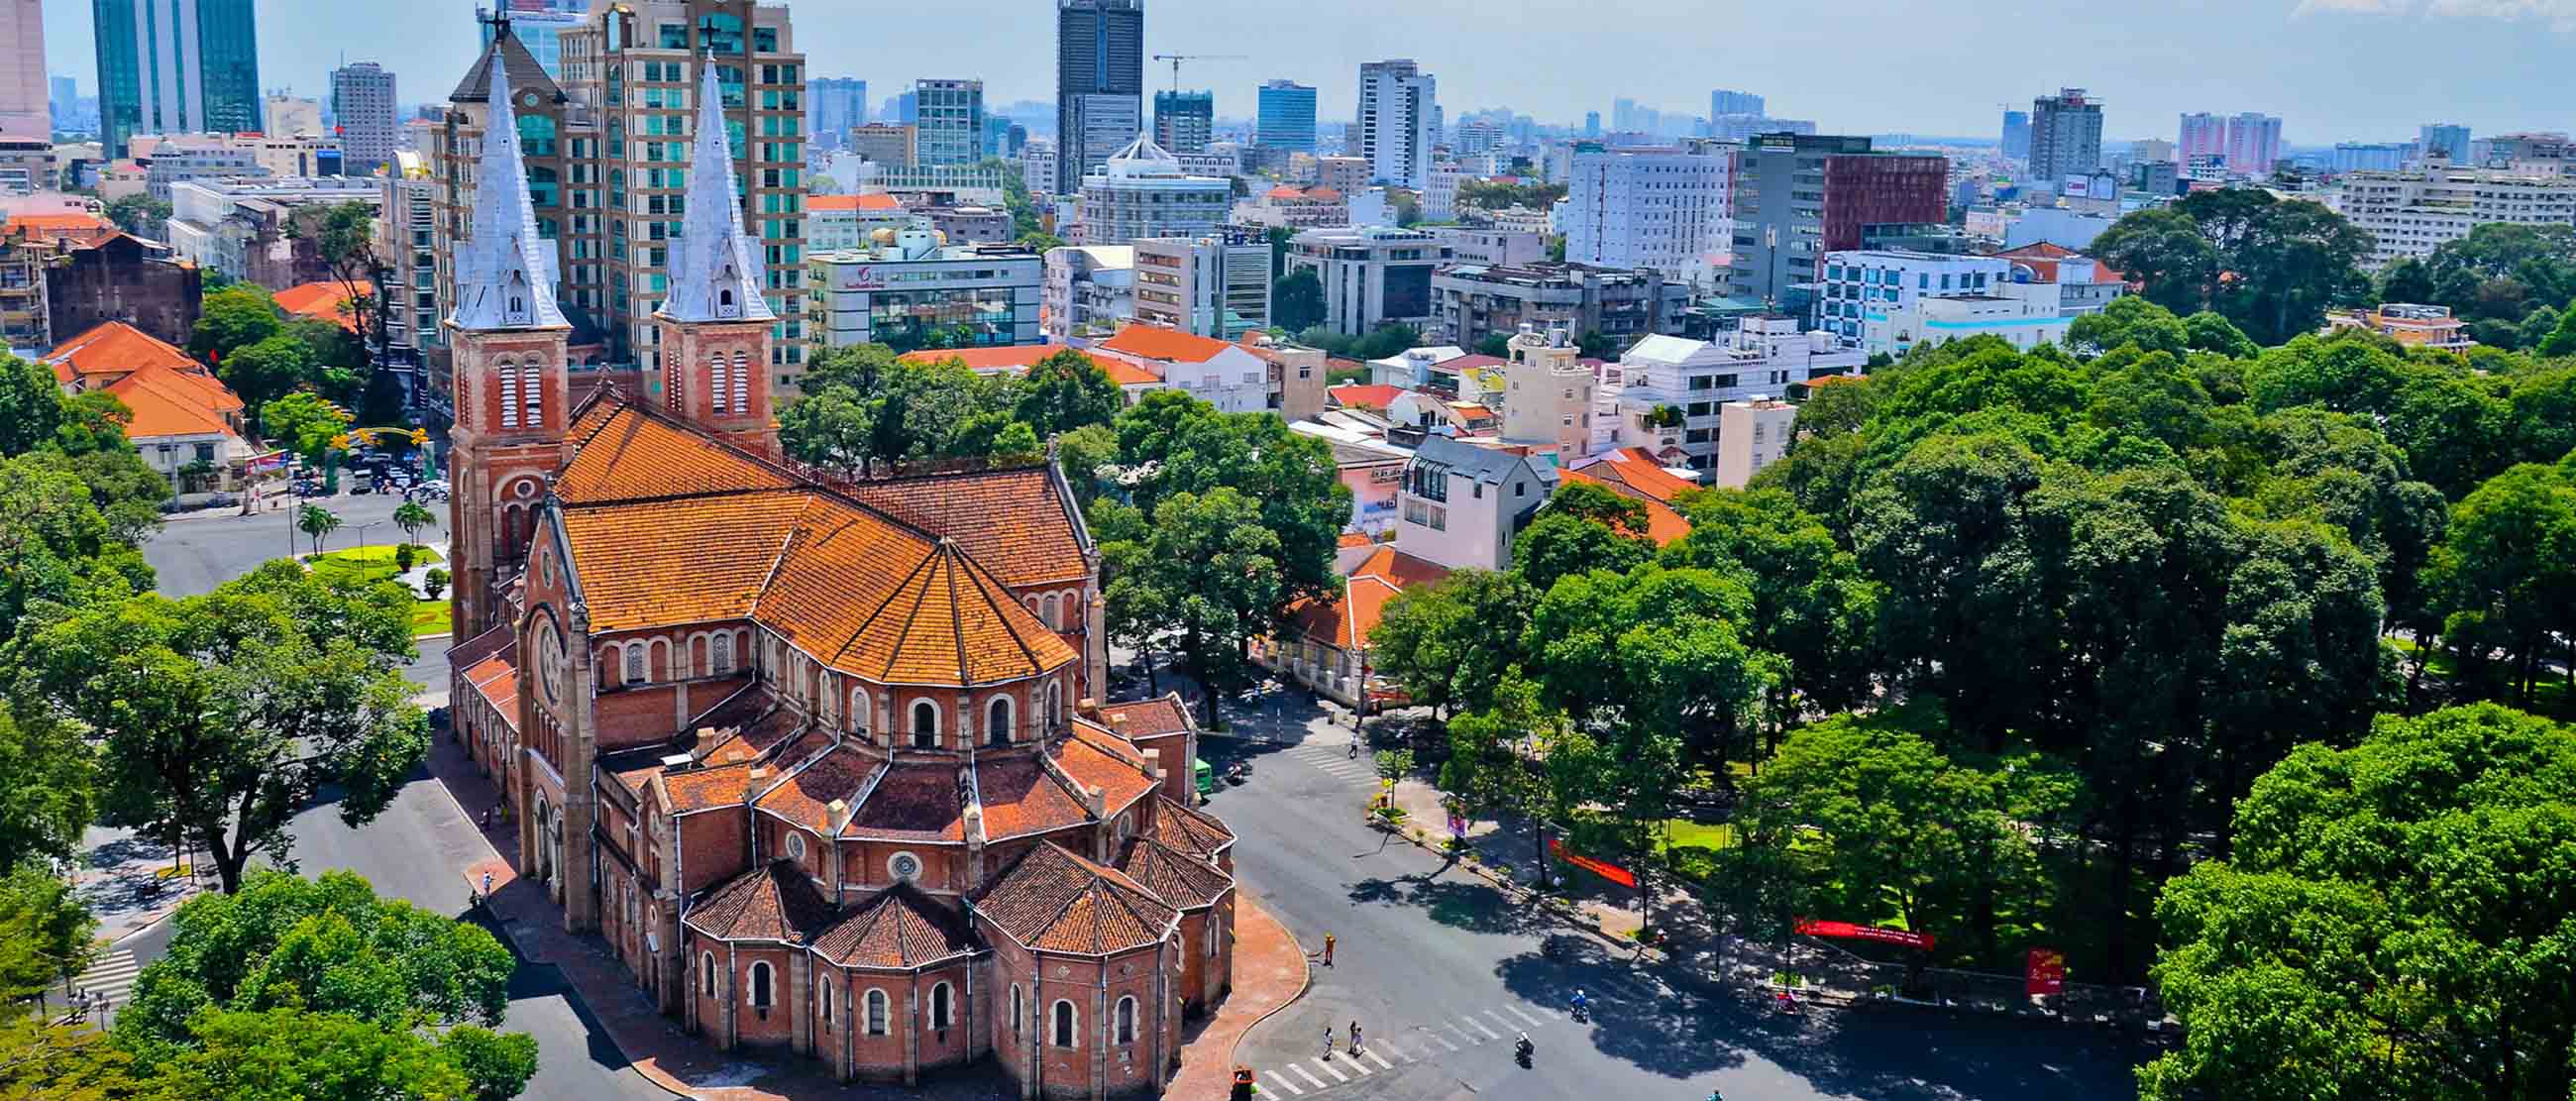 Ho Chi Minh City is a bustling metropolis with a rich history and vibrant street life